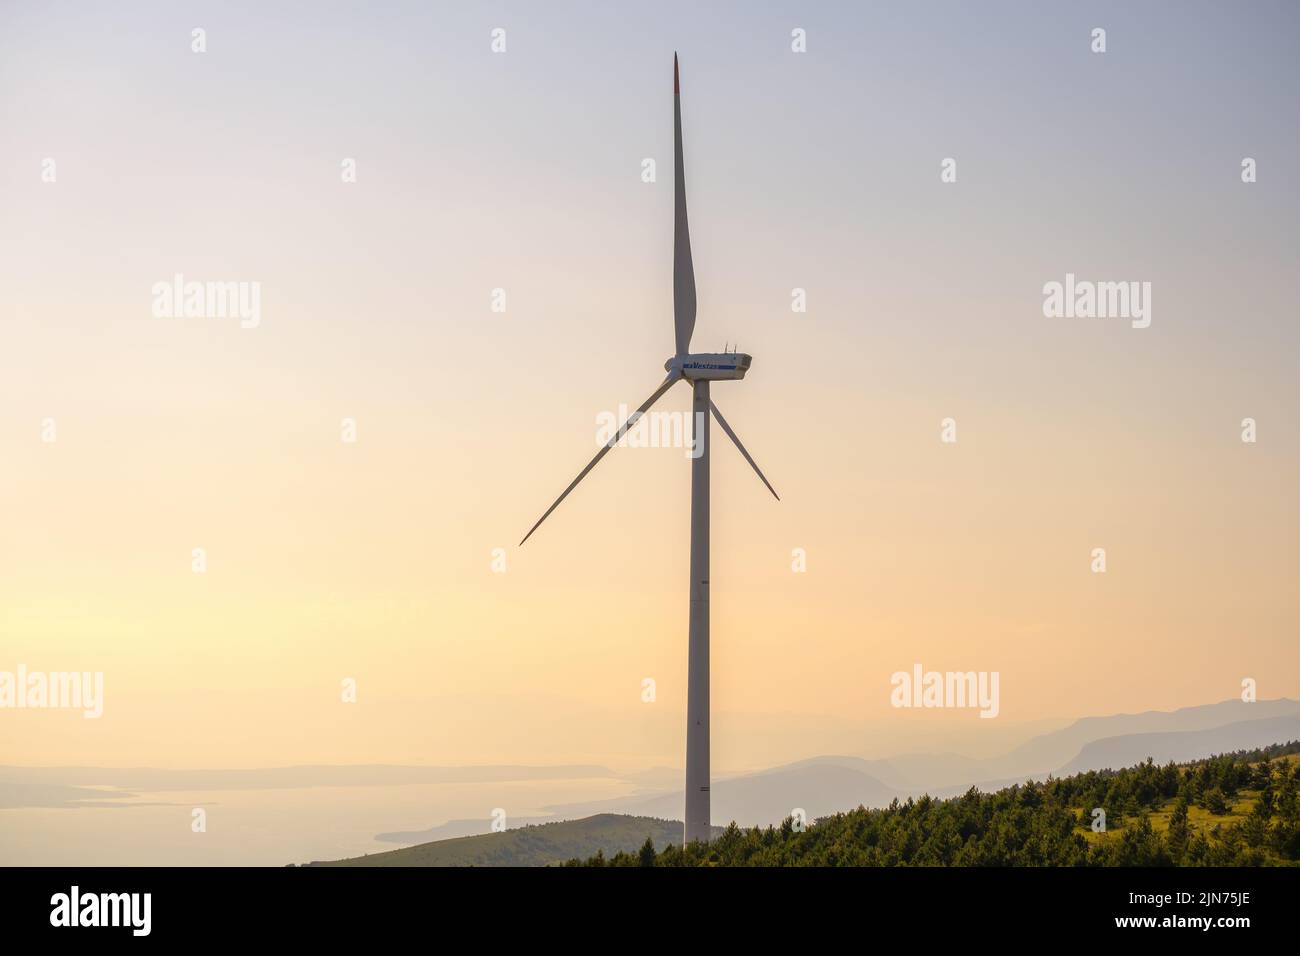 Wind turbine produces electrical green energy standing on coast of Adriatic Sea. Huge windmill converts wind power into electricity at sunset Stock Photo